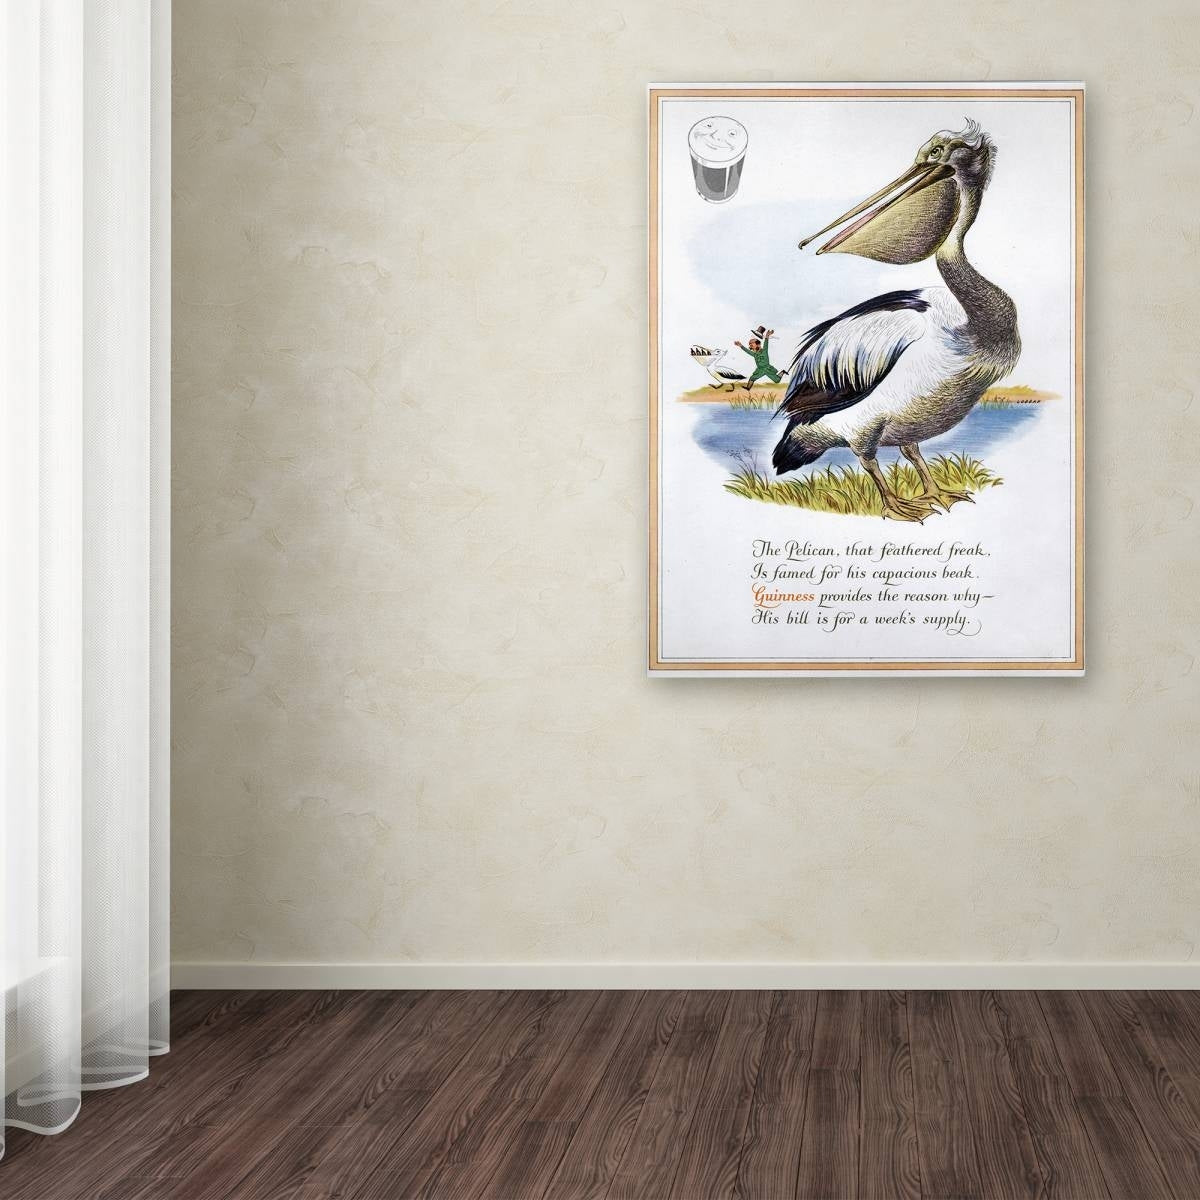 A Guinness Brewery 'Guinness Pelican' Canvas Art with a poem on it.